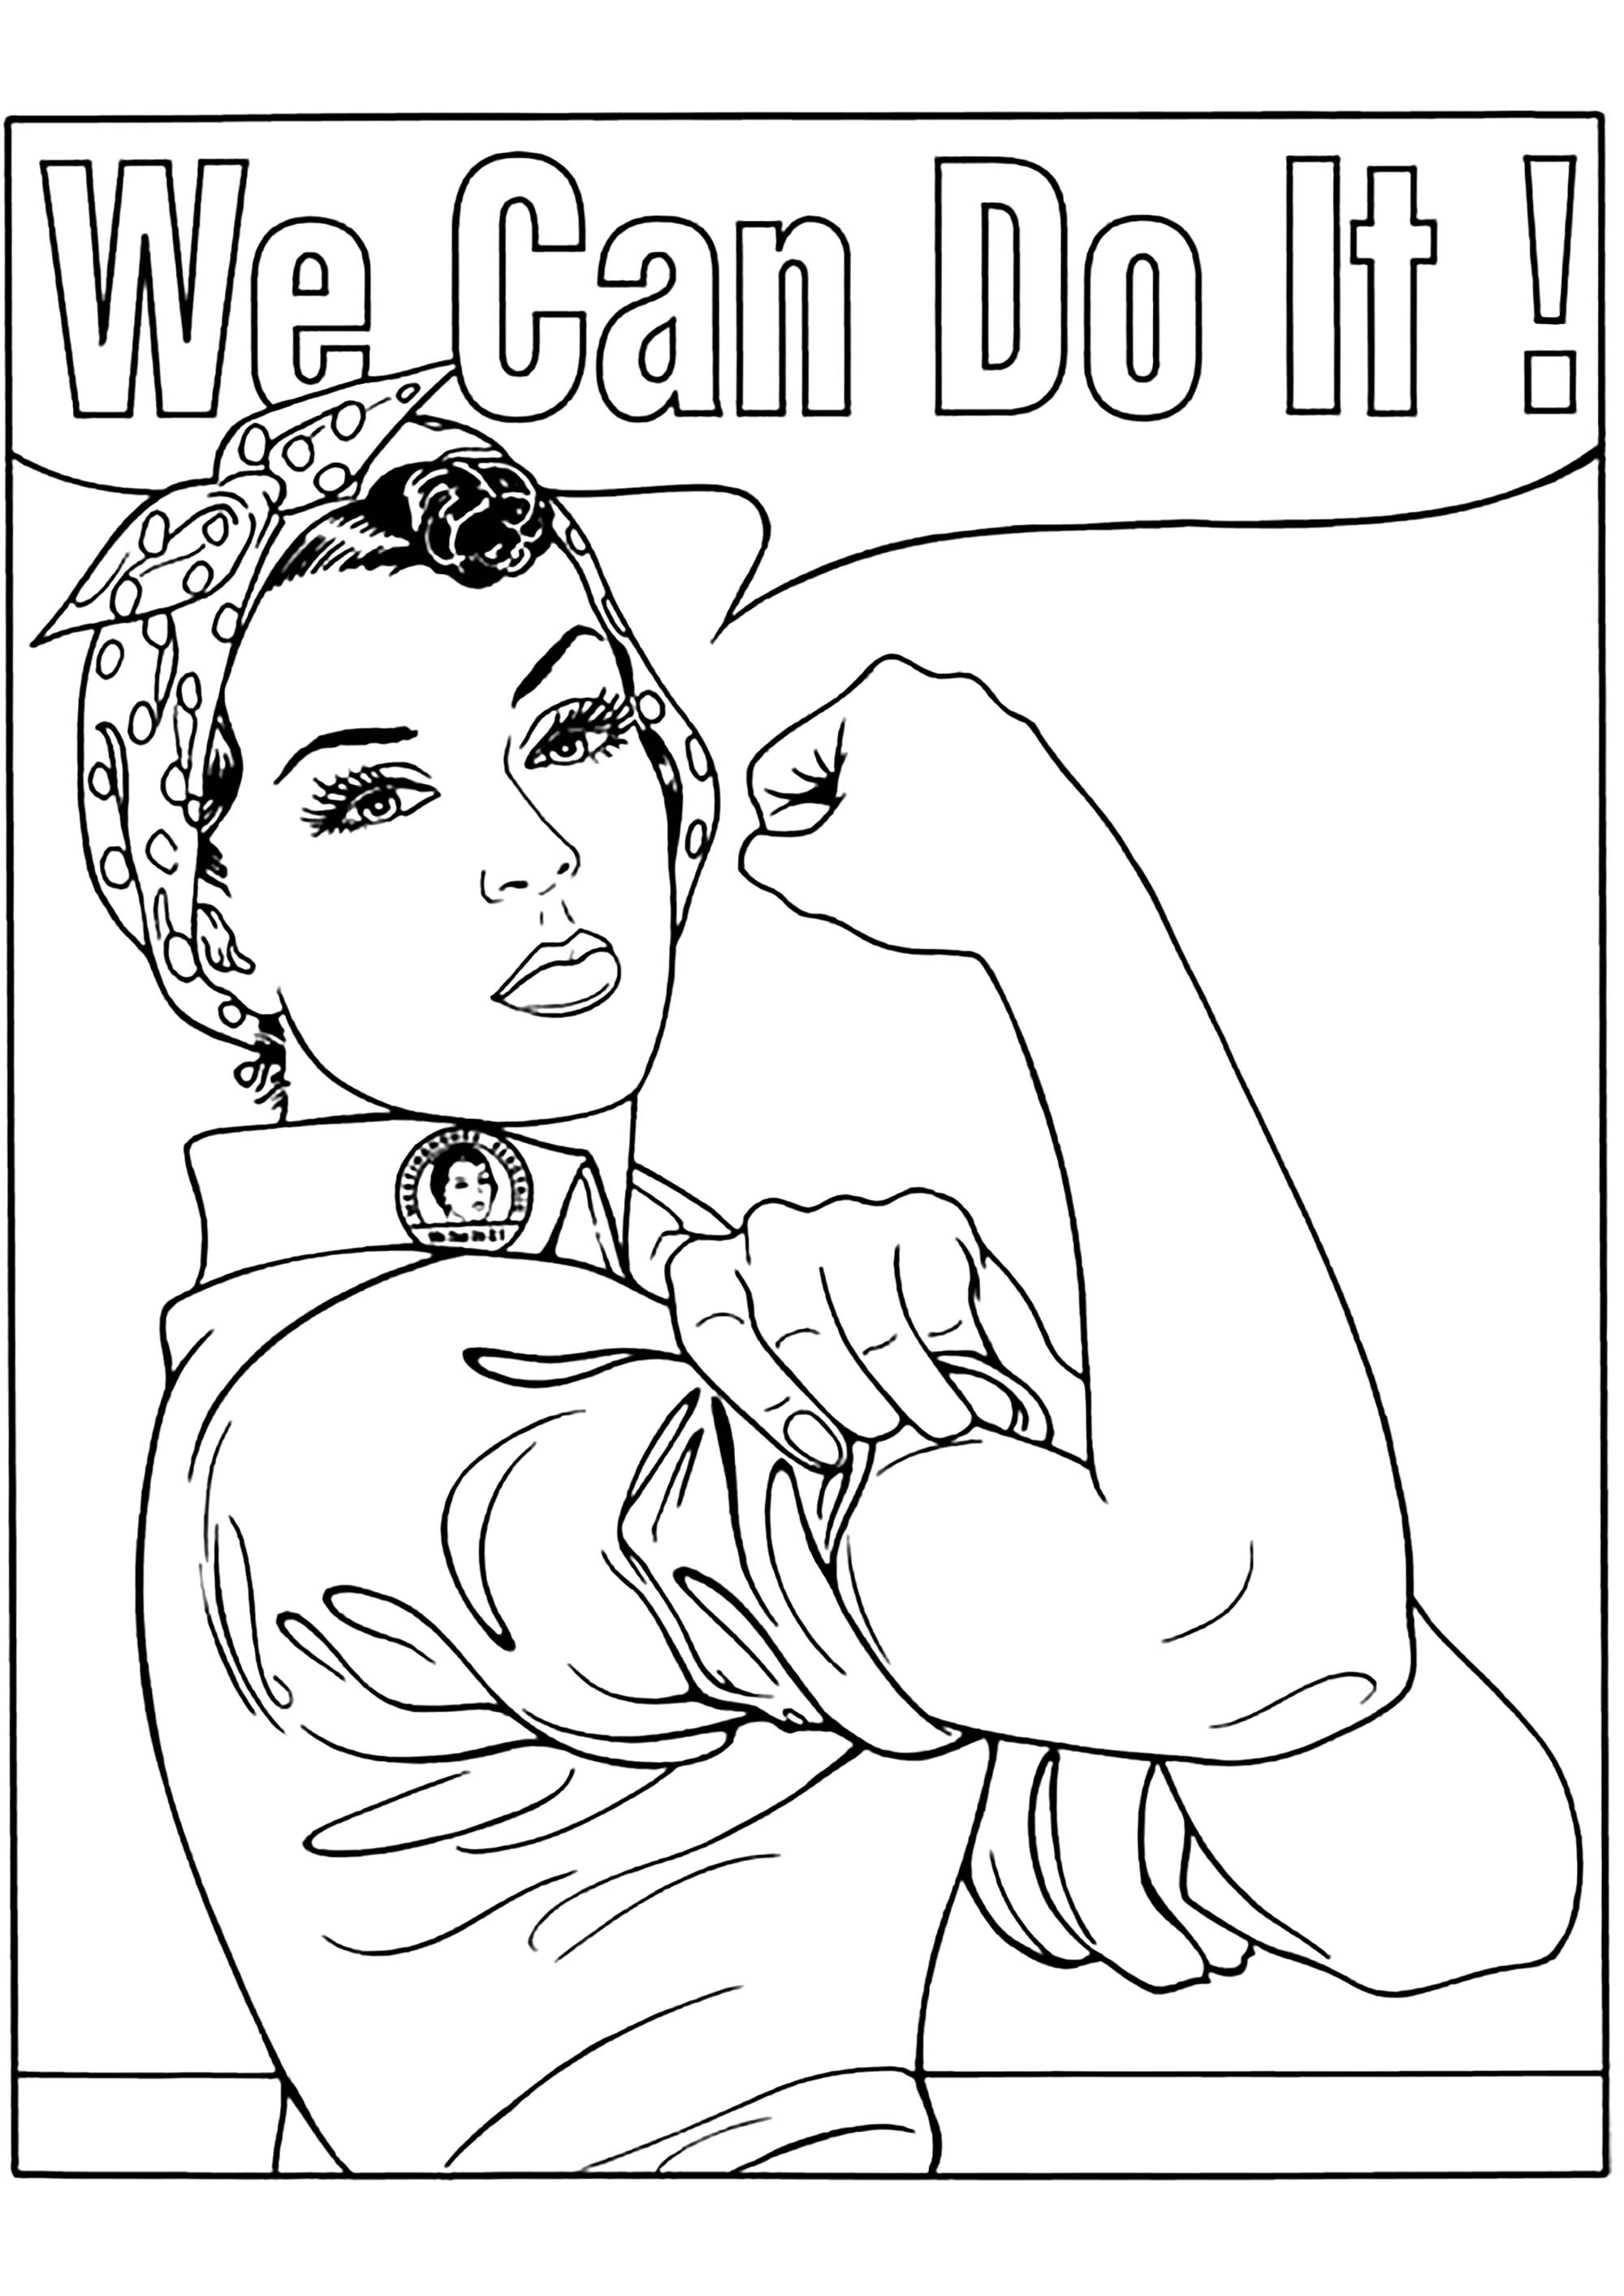 can coloring pages